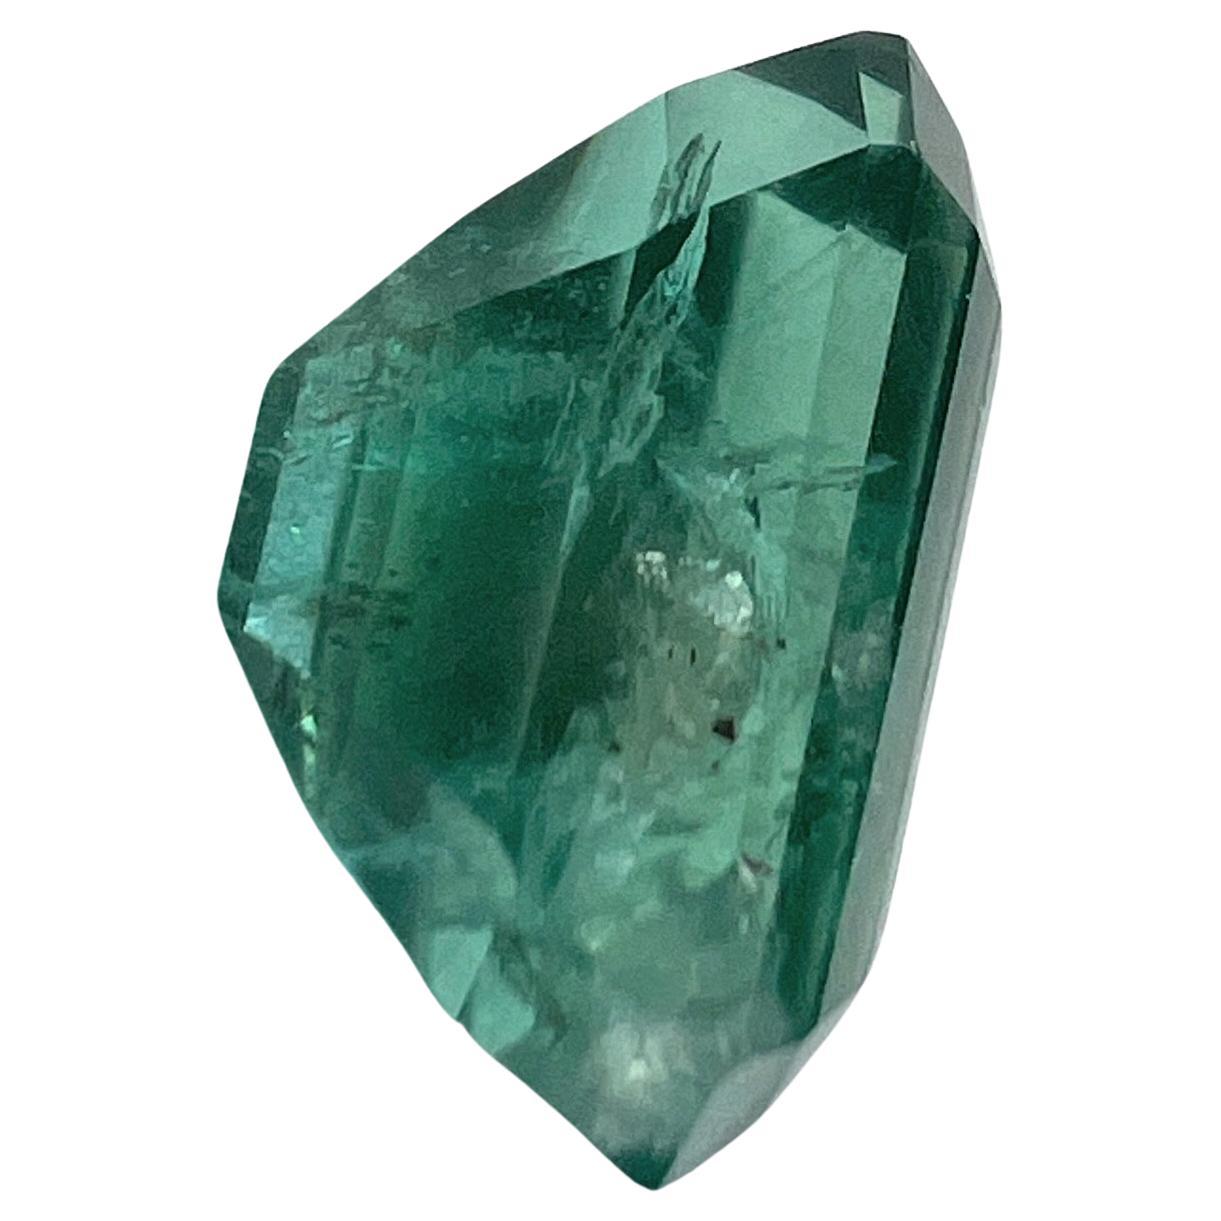 Discover the epitome of design luxury with our 4.80ct Non-Oil Natural Green Emerald Gemstone. Renowned for its remarkable clarity and flawless composition for an emerald, this gem is a true embodiment of nature's finest artistry. The perfect size,